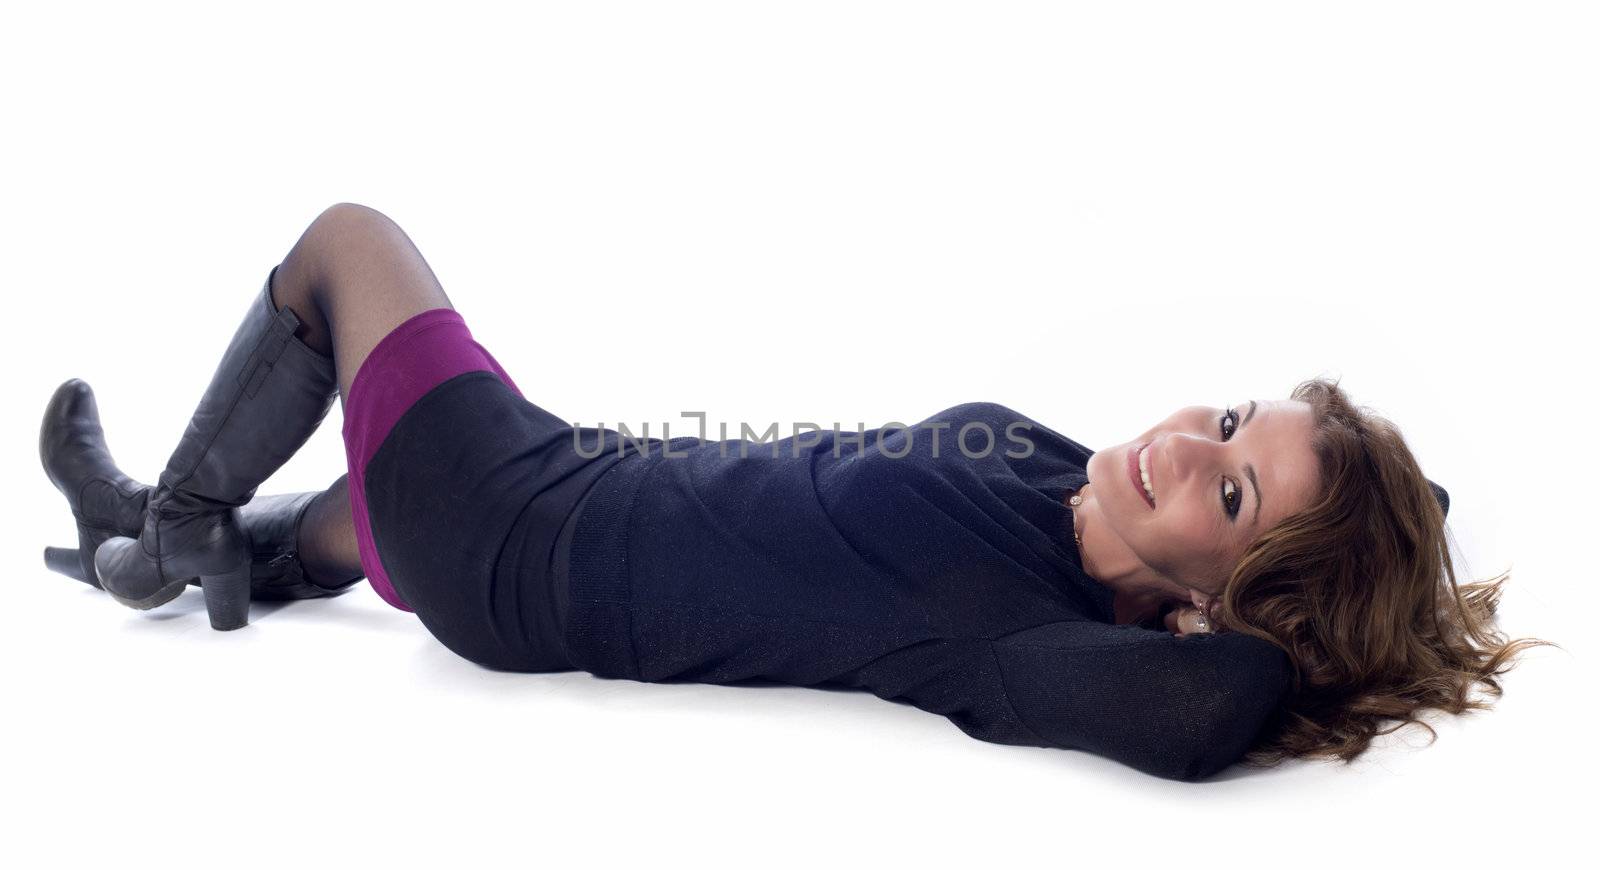 beautiful smiling woman laid down in front of white background